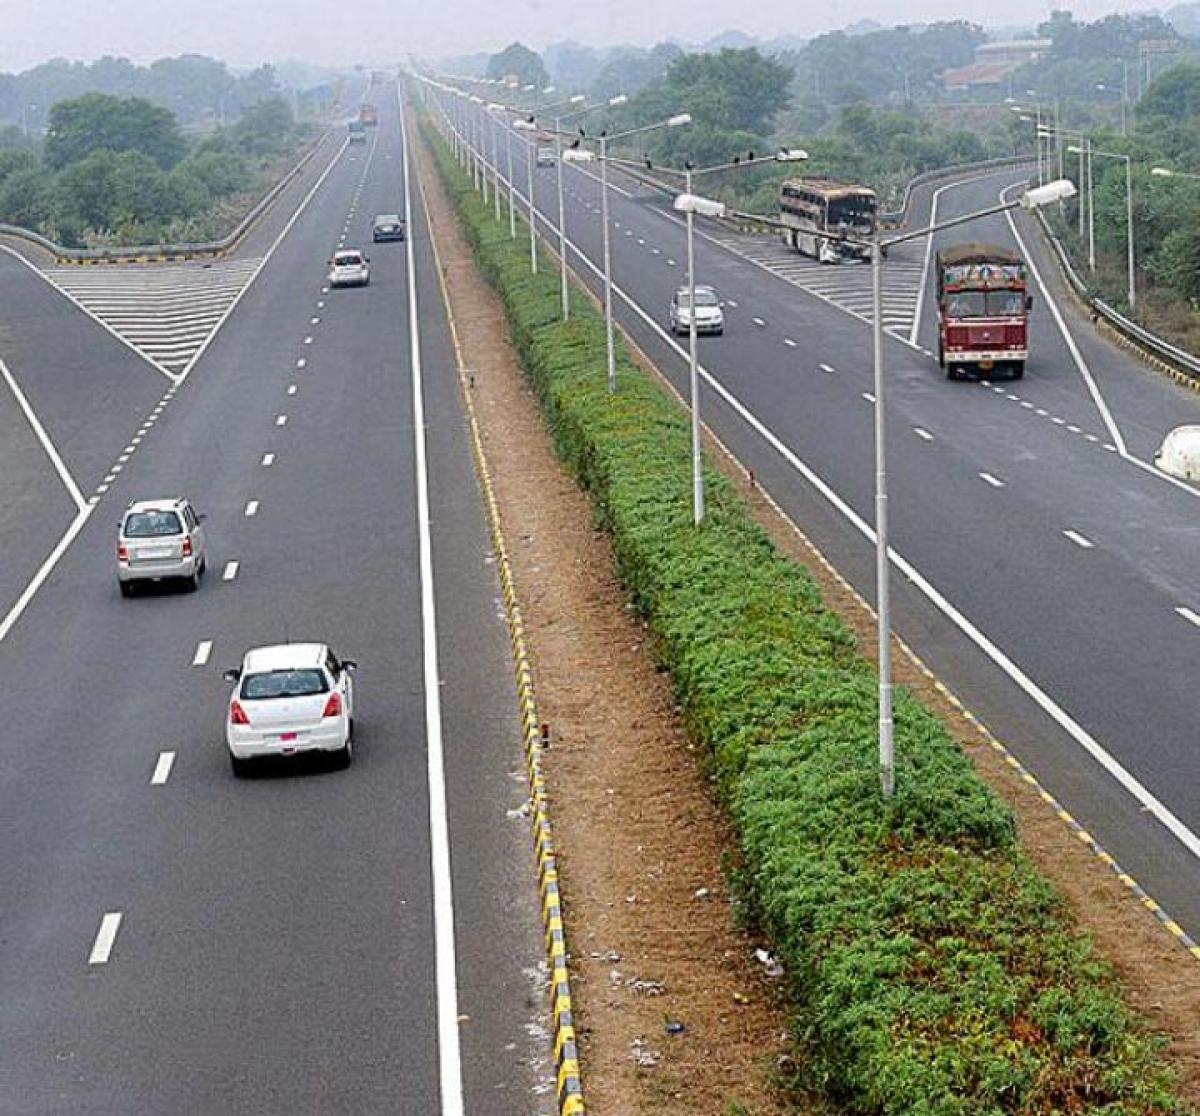 10% toll hike in Navalur from Friday